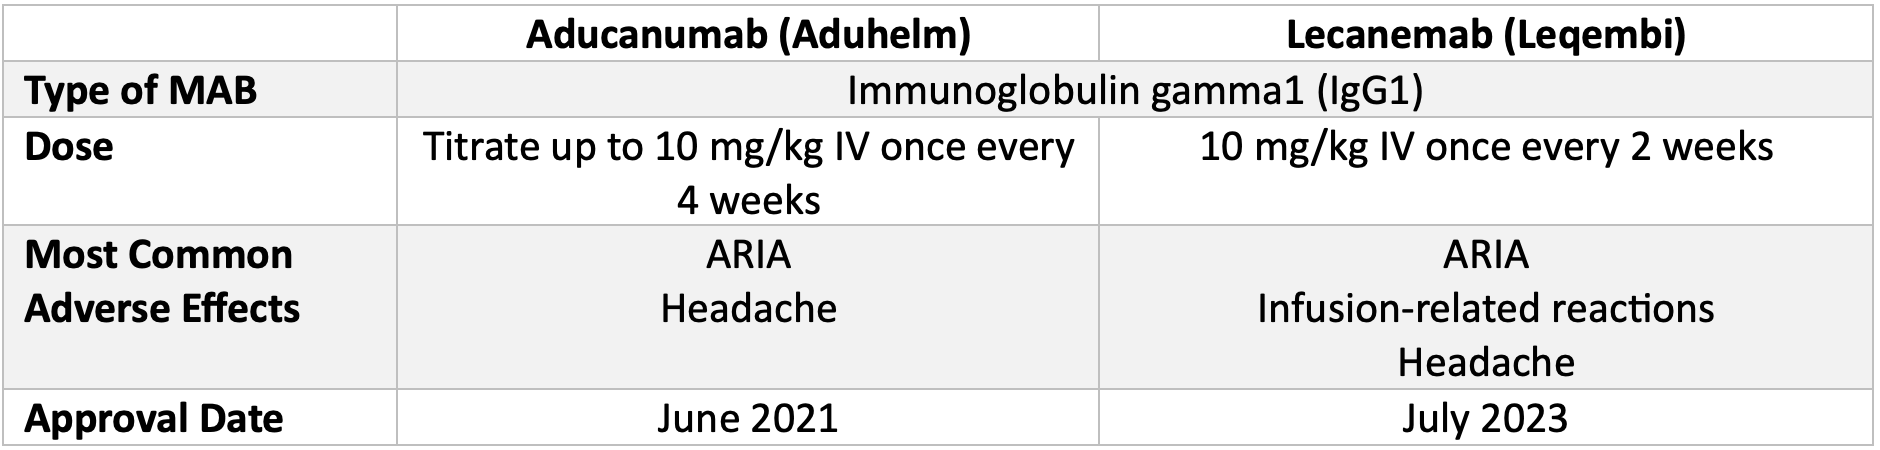 Table 2. Overview of Aducanumab and Lecanemab 